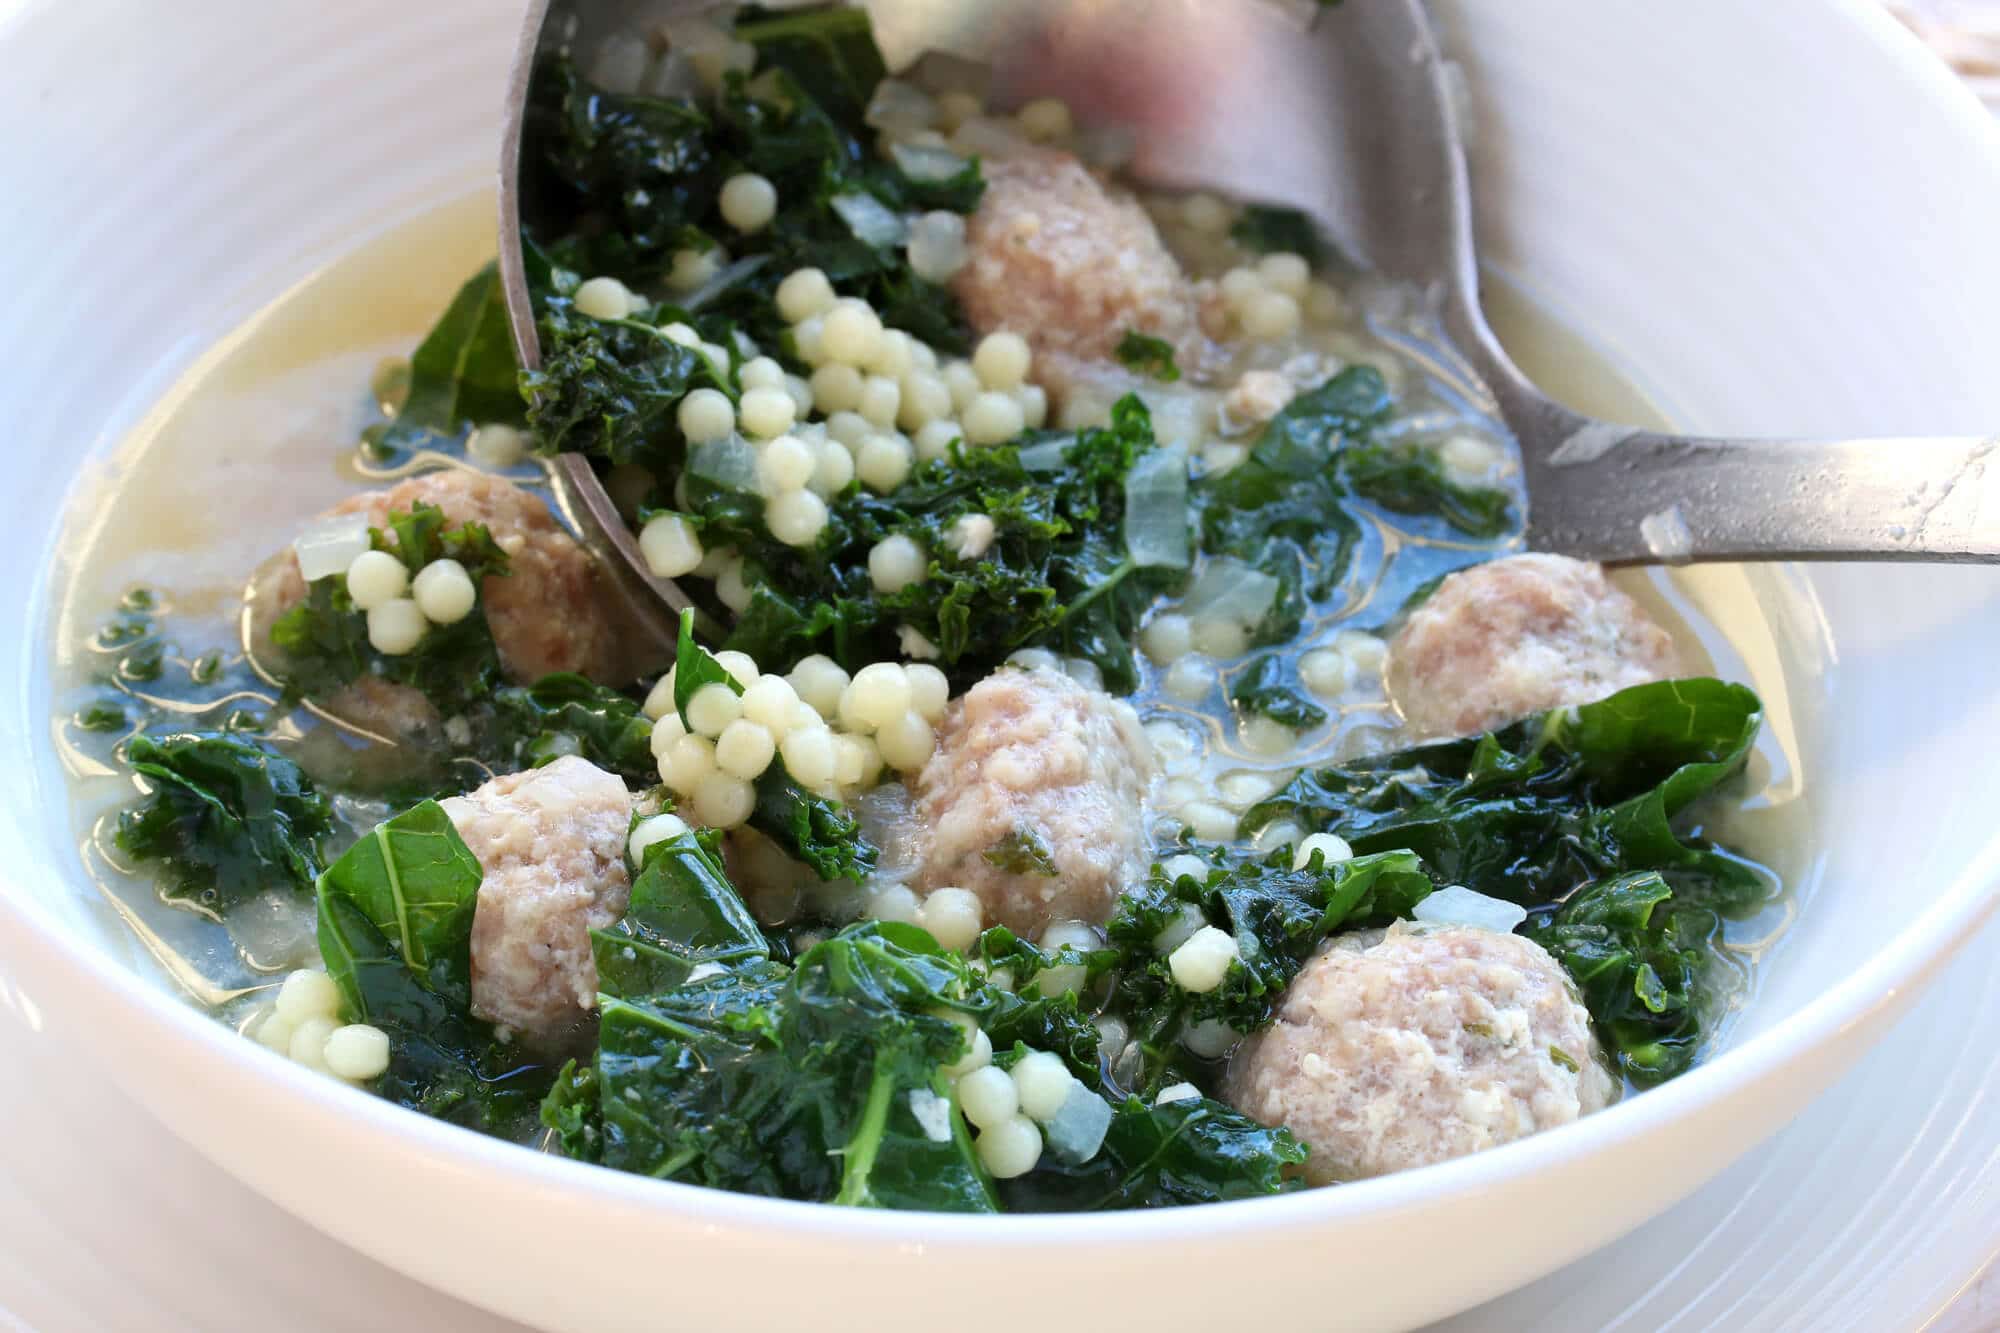 Italian wedding soup recipe best authentic traditional healthy